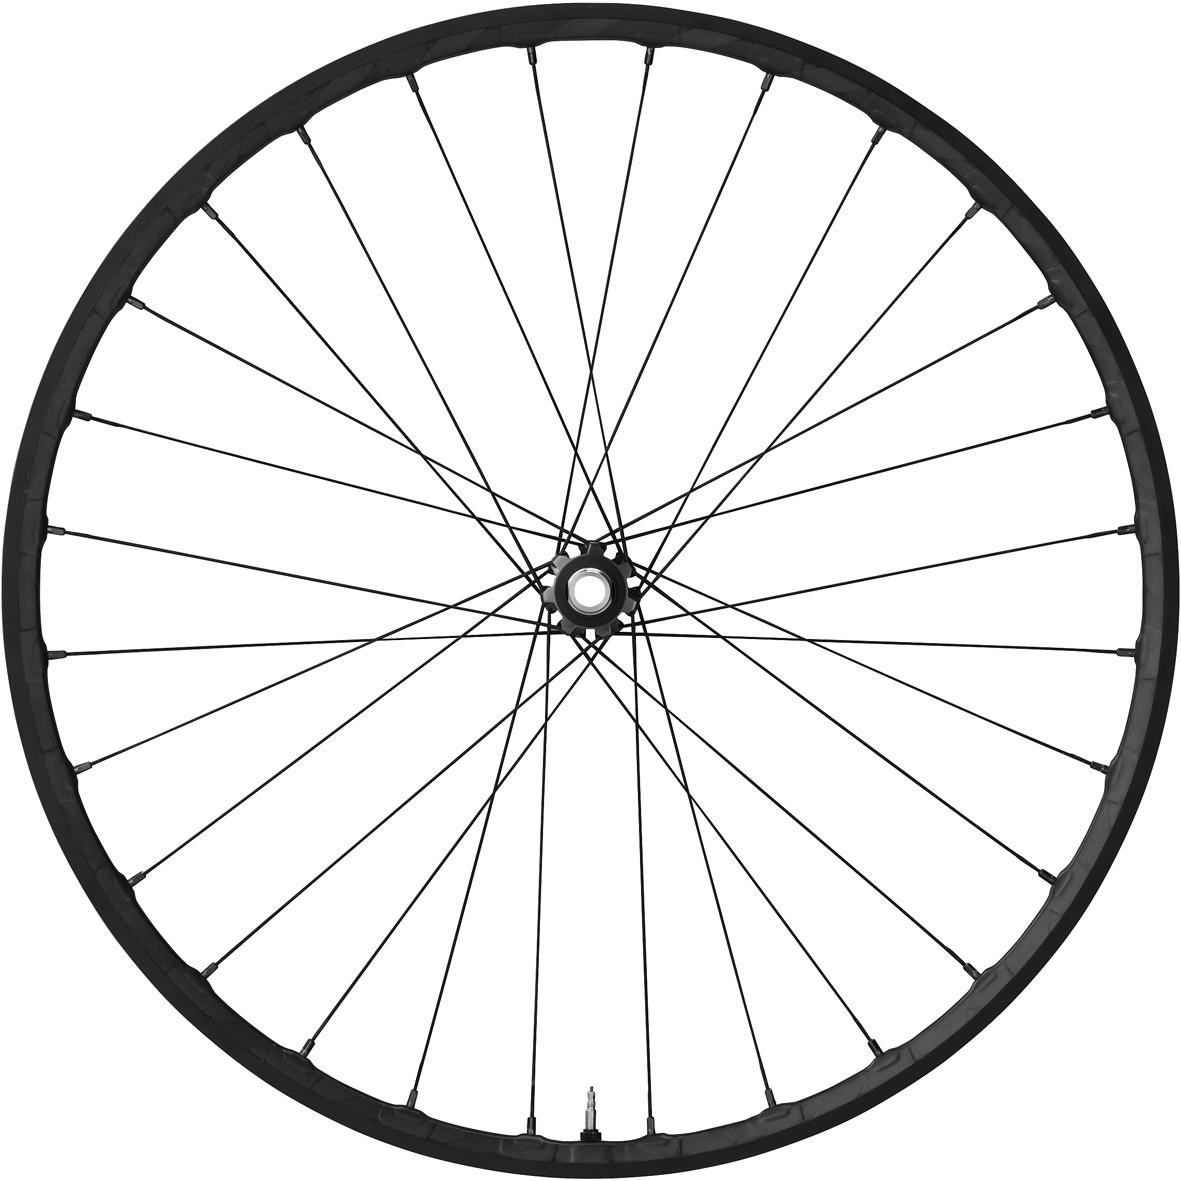 Shimano WH-M9000-TL XTR  XC Wheel -  15 x 100 mm Axle -  27.5in (650B) Carbon Clincher - Front product image